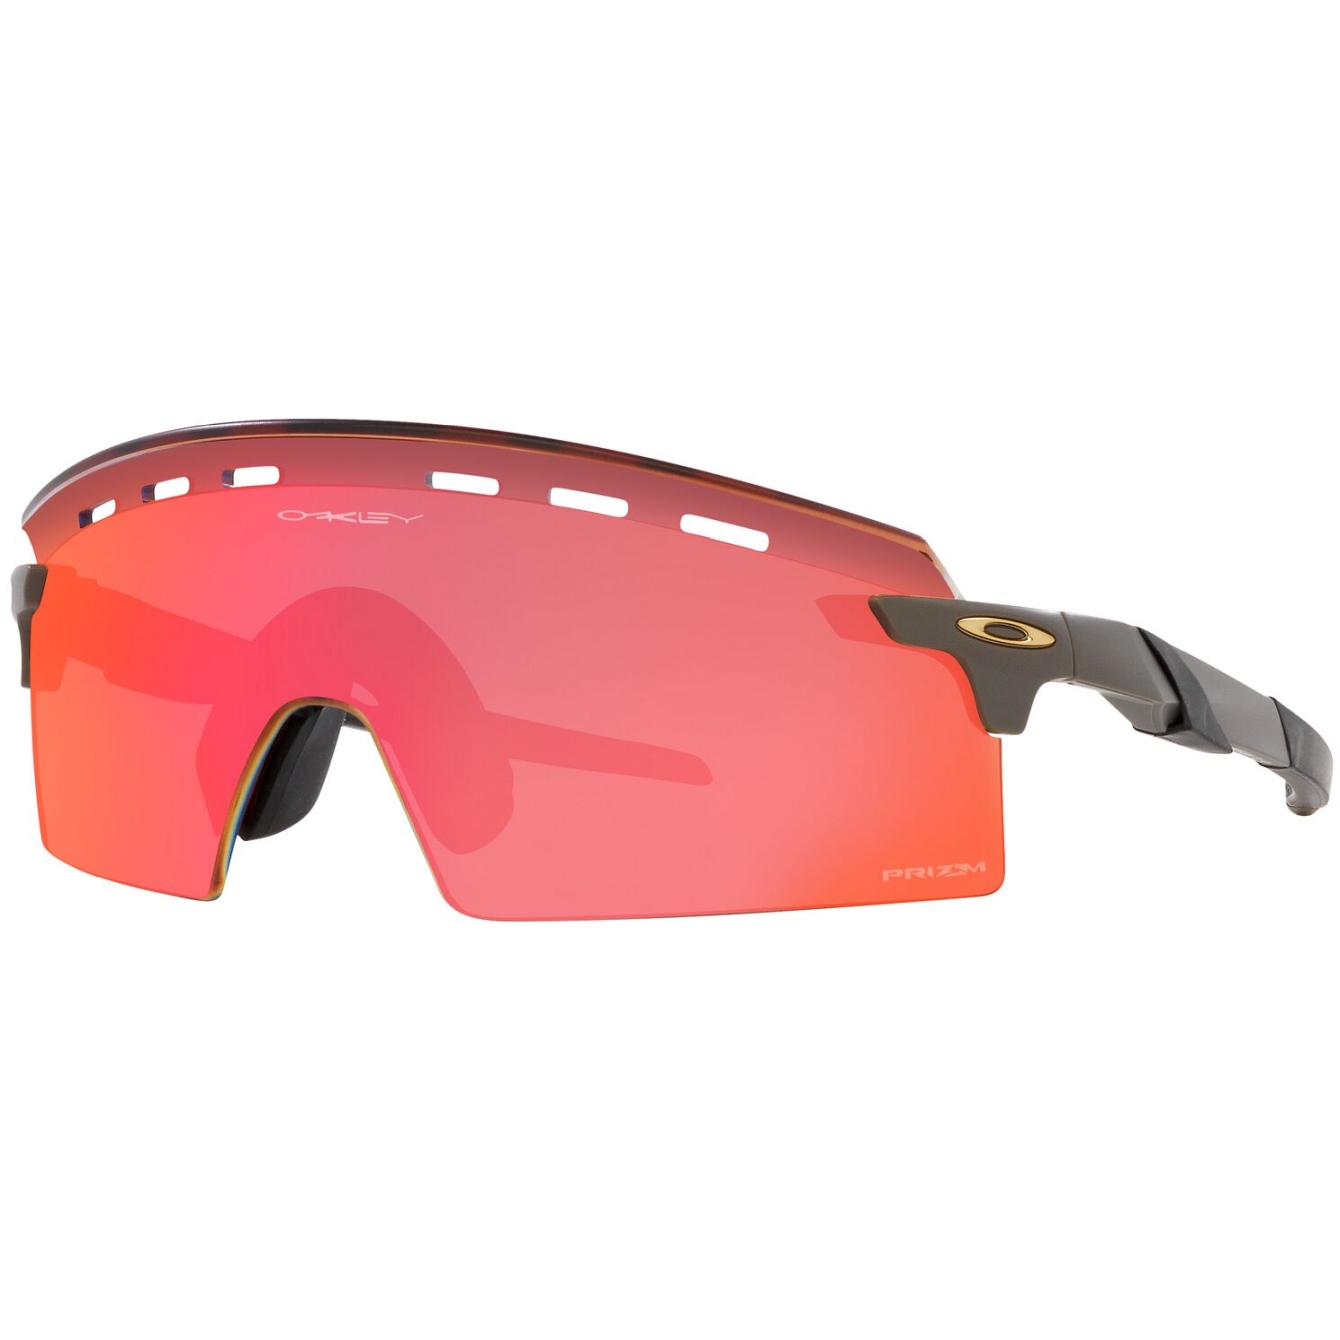 Picture of Oakley Encoder Strike Glasses - Matte Onyx/Prizm Trail Torch - OO9235-0839